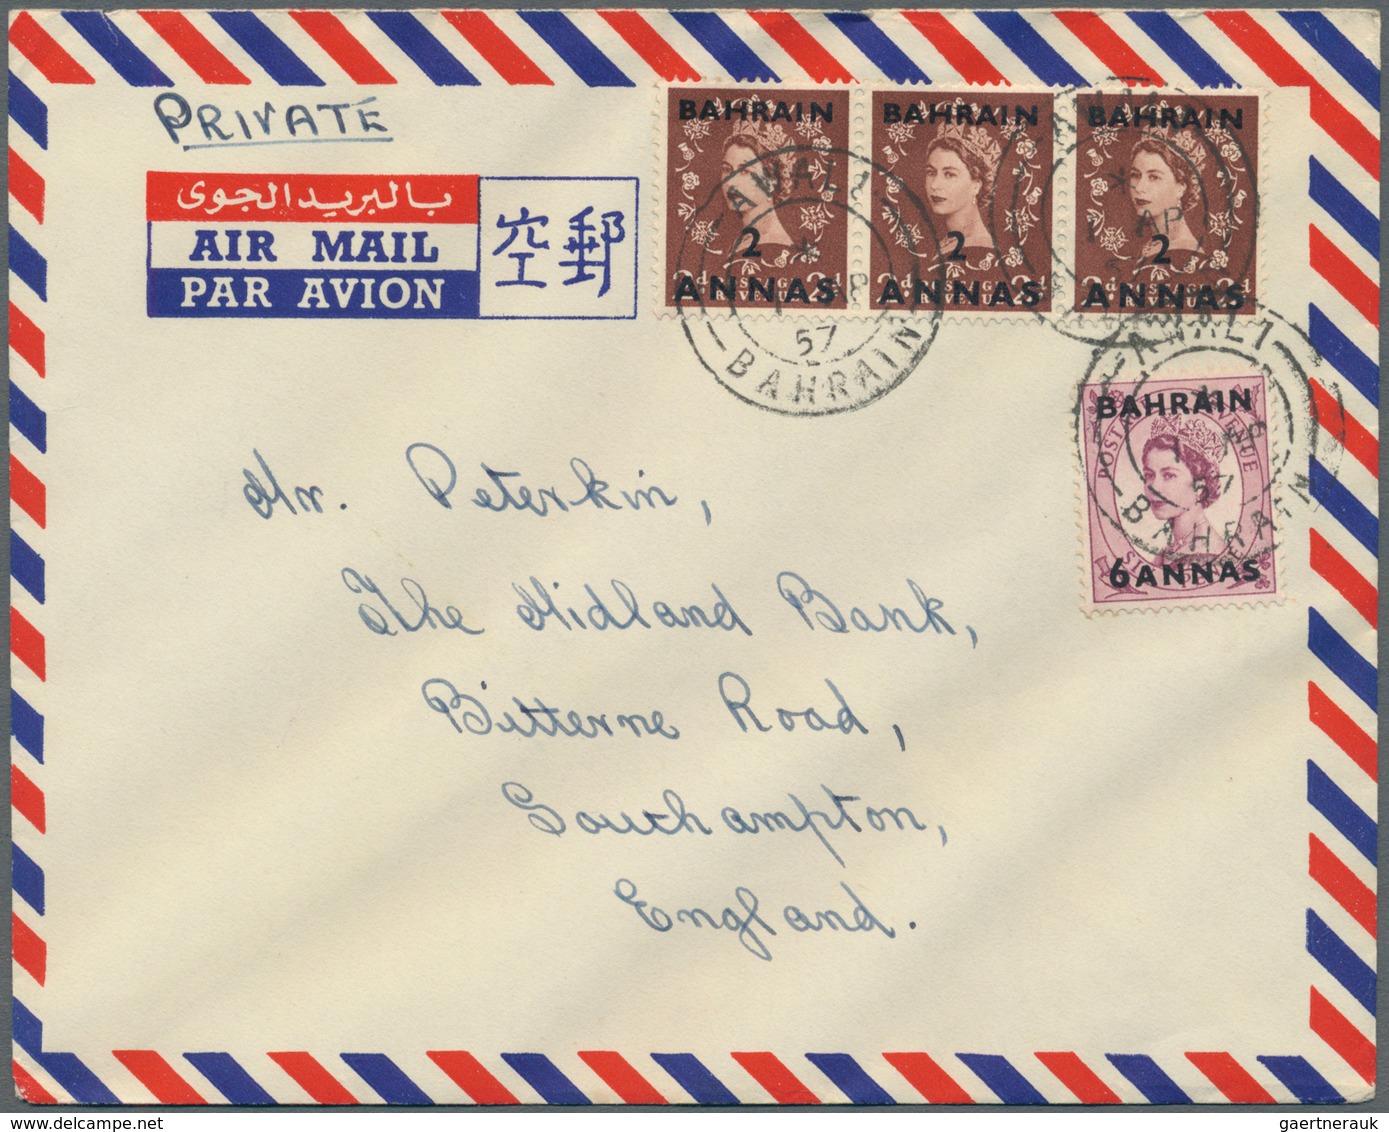 Asien: 1904/1966: Very fine lot of 26 envelopes and used picture postcards, mainly from ADEN, BAHRAI